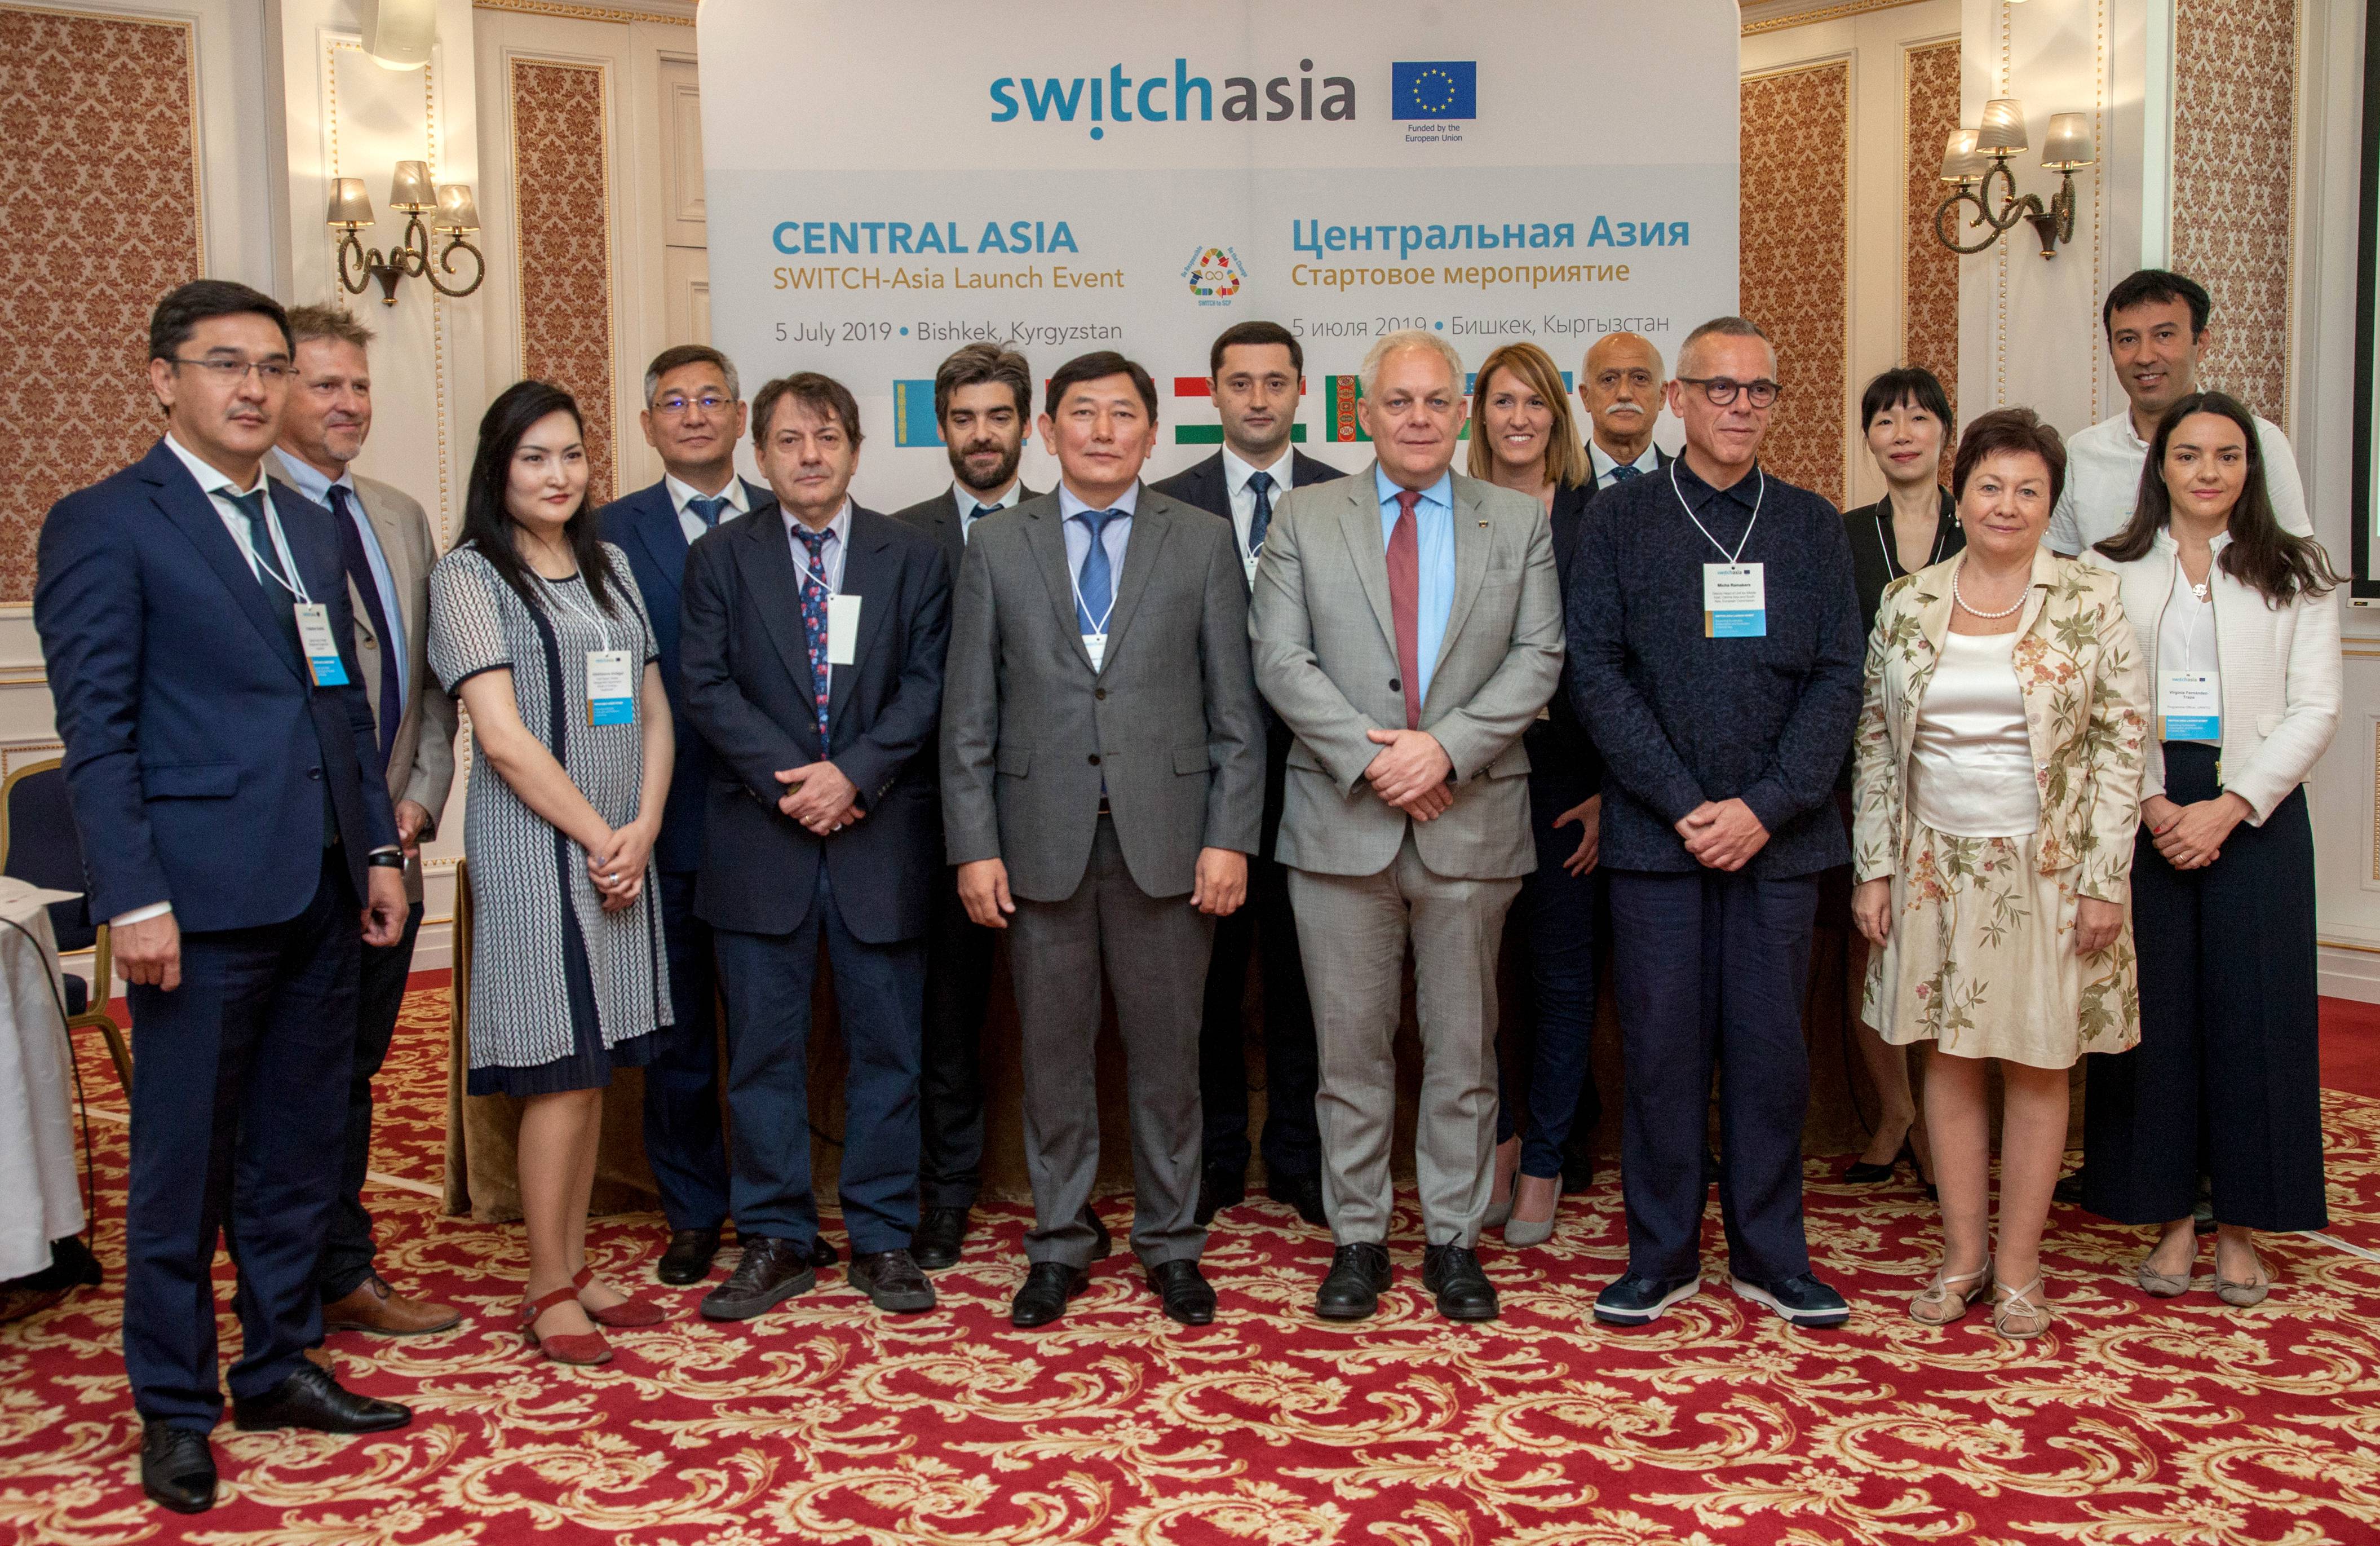 SWITCH-Asia launch event in Central Asia paves the way for boosting innovation and mainstreaming sustainable consumption and production (SCP) in the region.